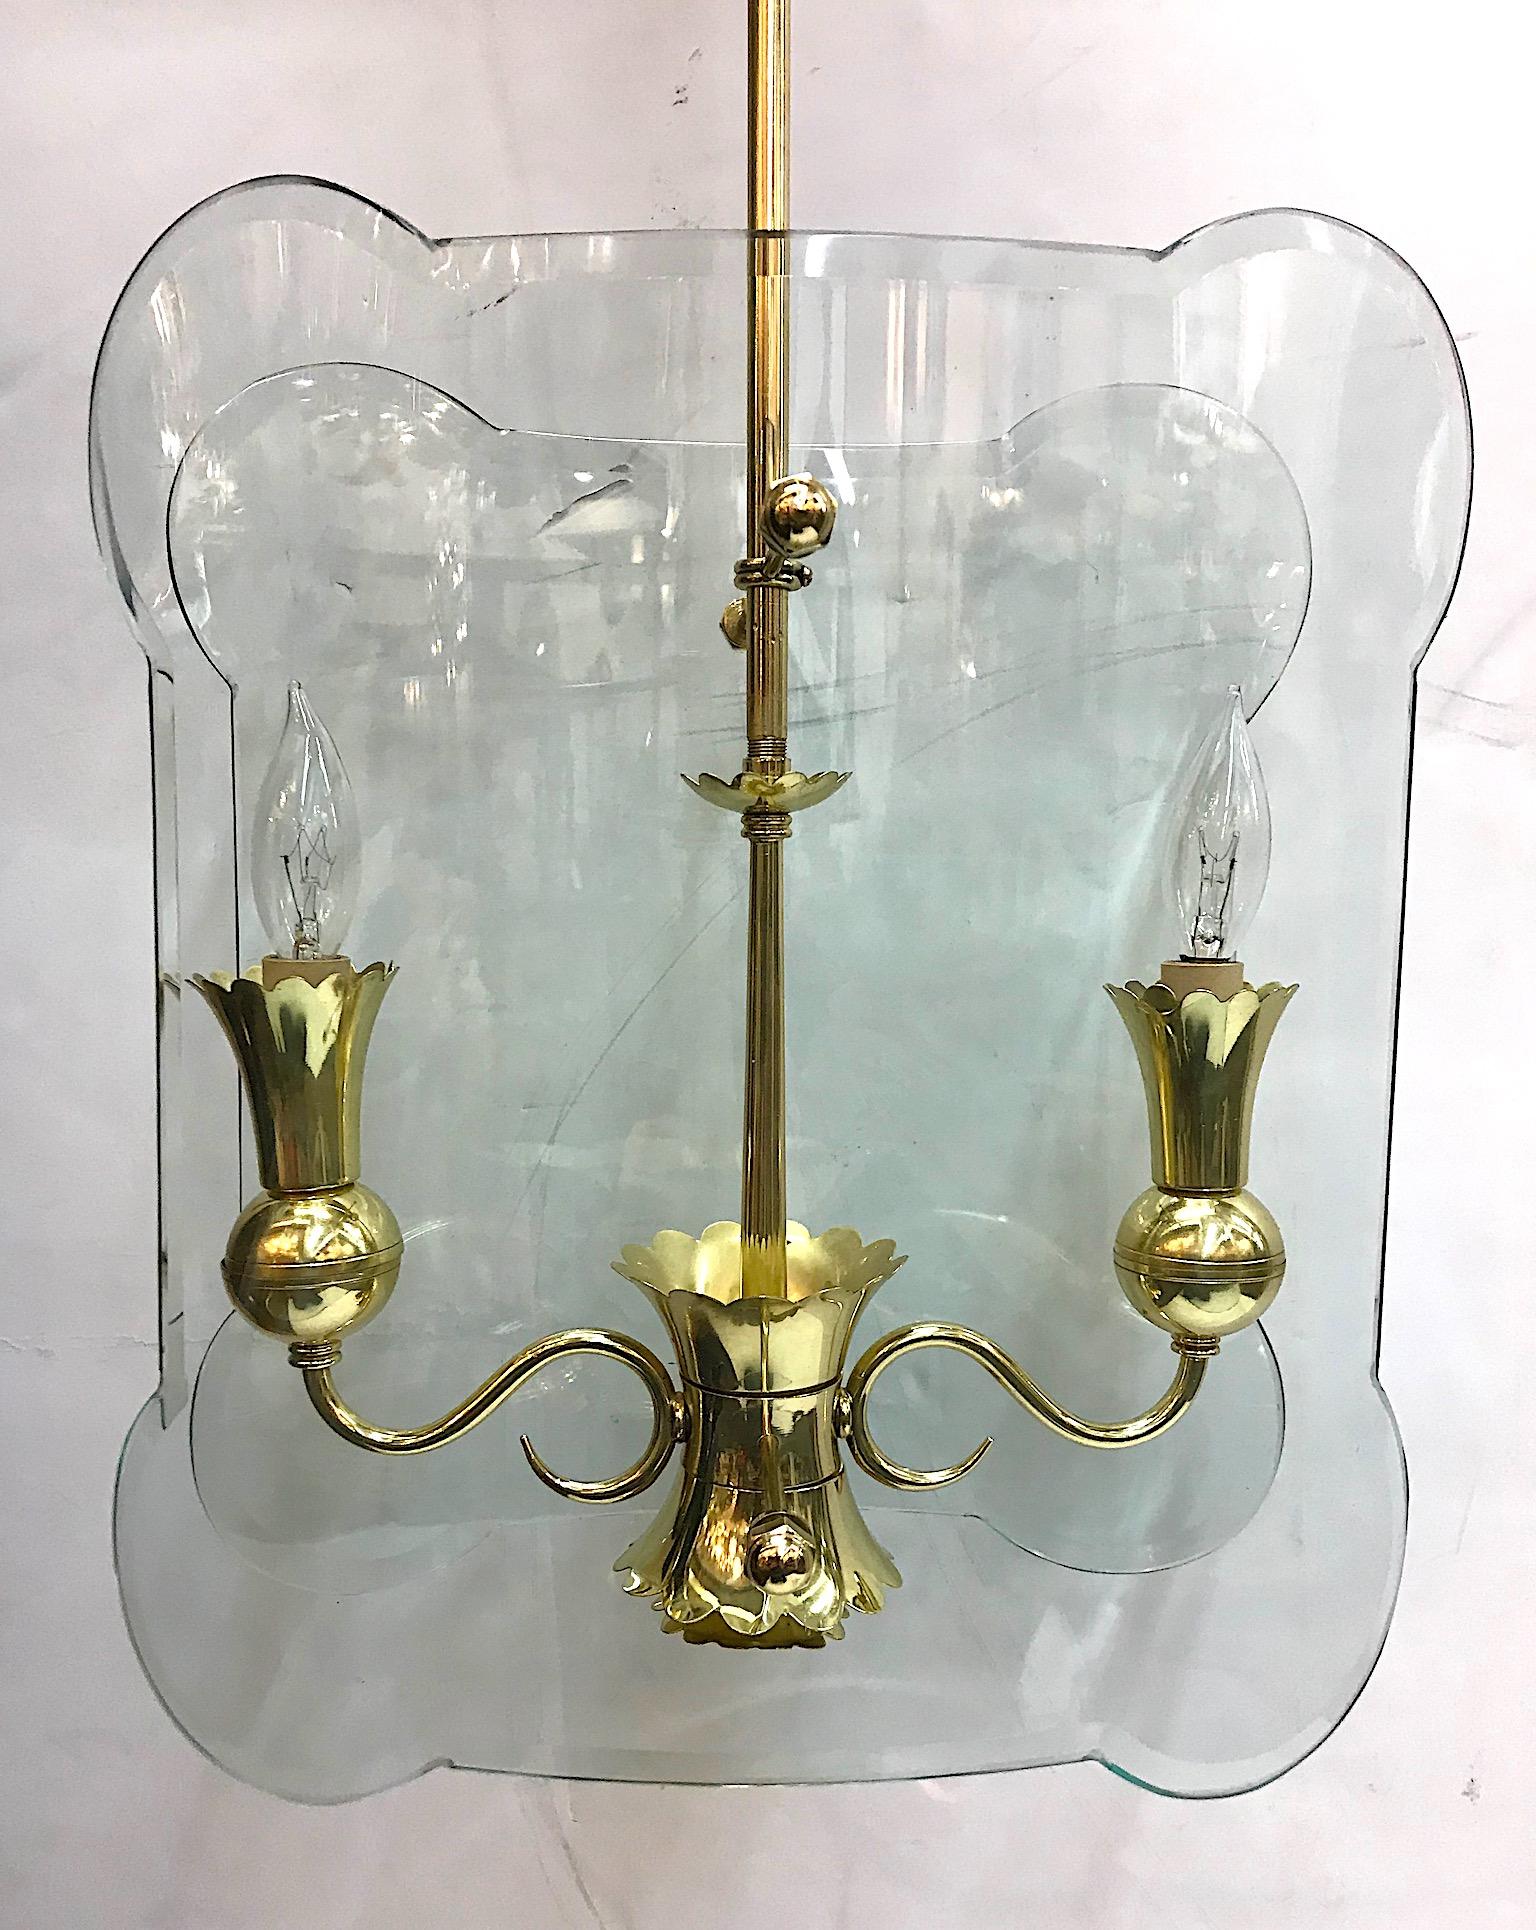 A lovely Italian 1940s brass two-light lantern / pendant light with glass panels. Each glass panel is meticulously cut with rounded corners, beveled edge and curved to properly house the two arms of the light. Each candelabra socket is housed in a